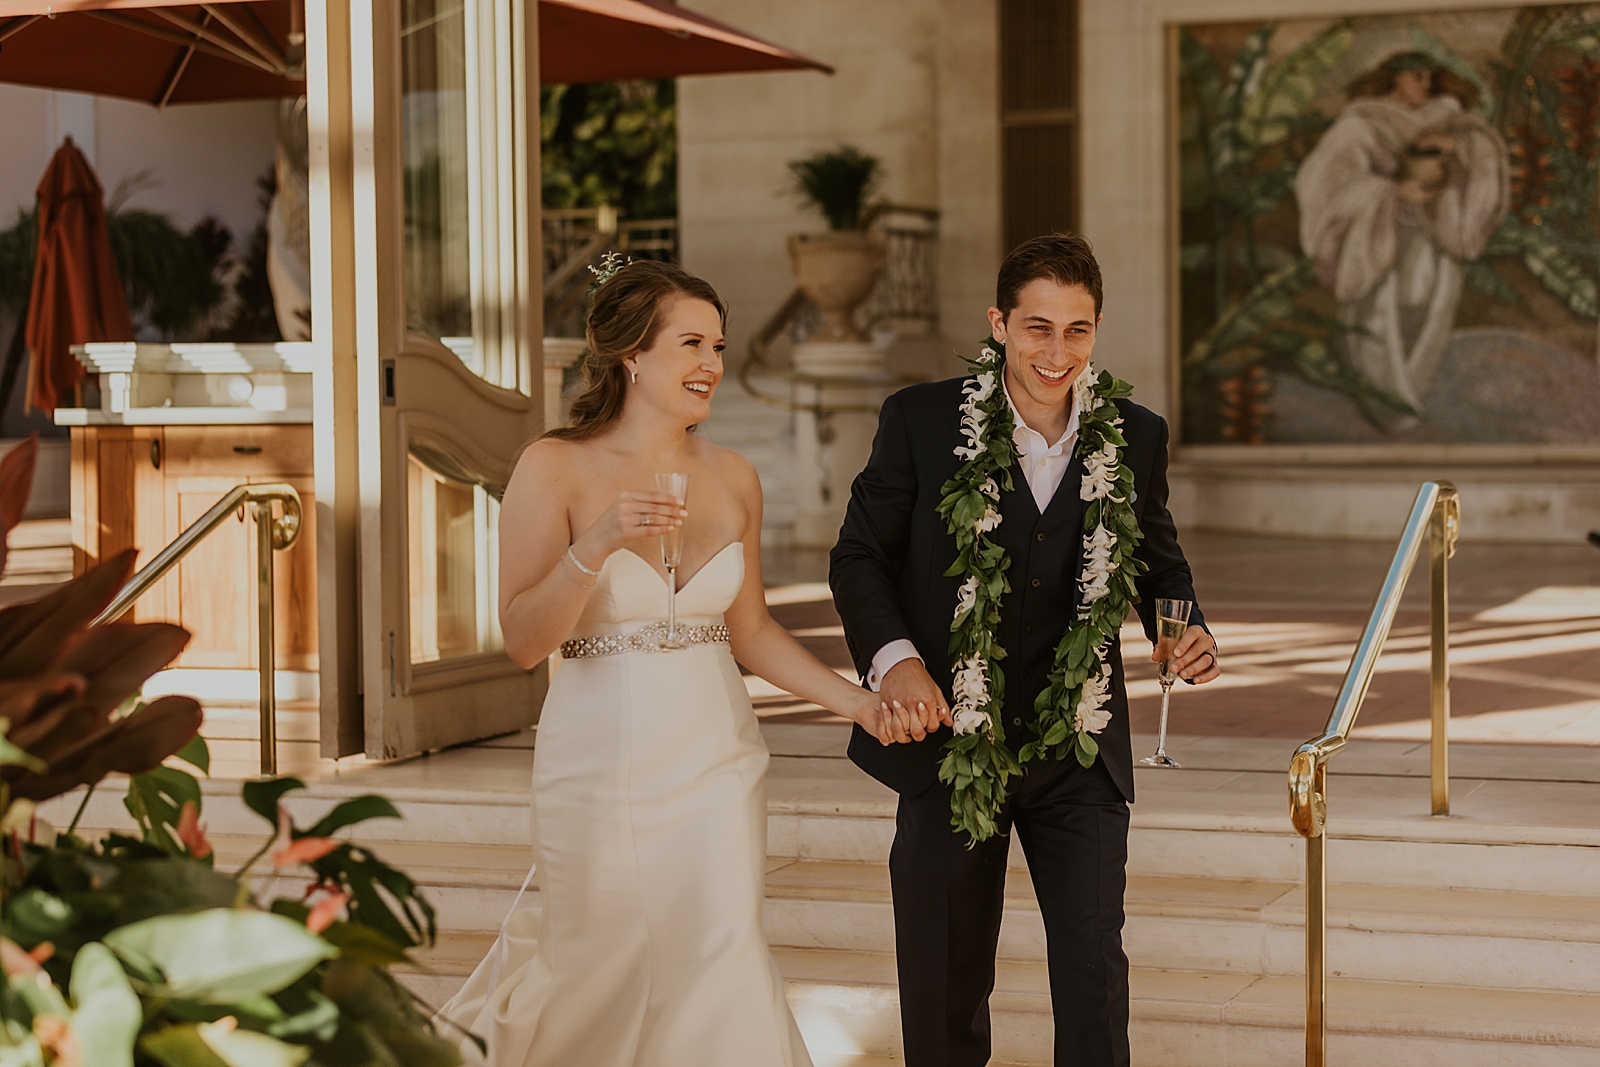 Bride and Groom holding hands and holding a glass of Champaign while walking together